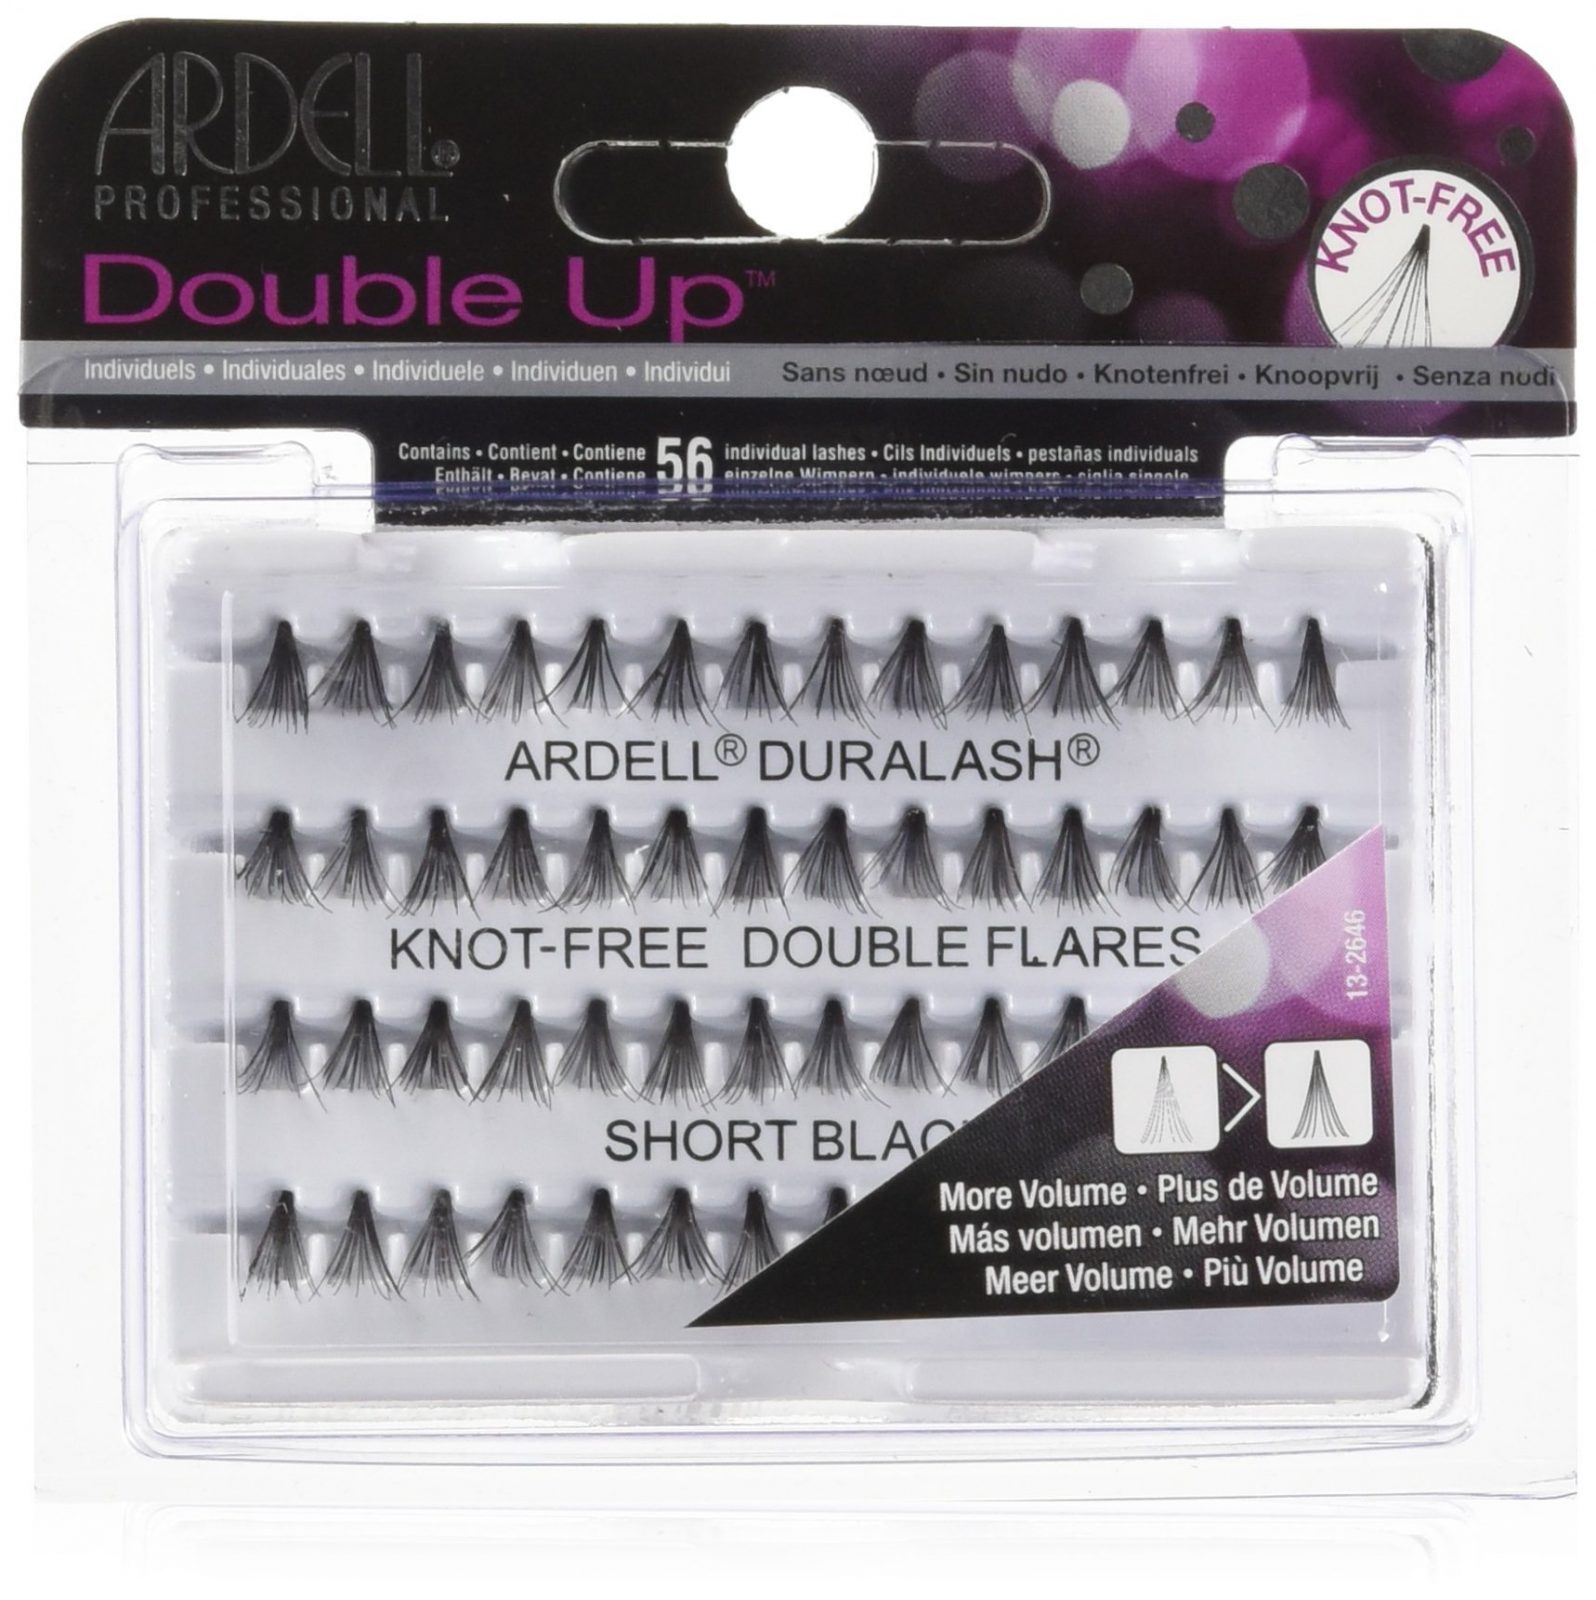 Ardell Professinal Double Up – Knot Free Double Flare, Short Black